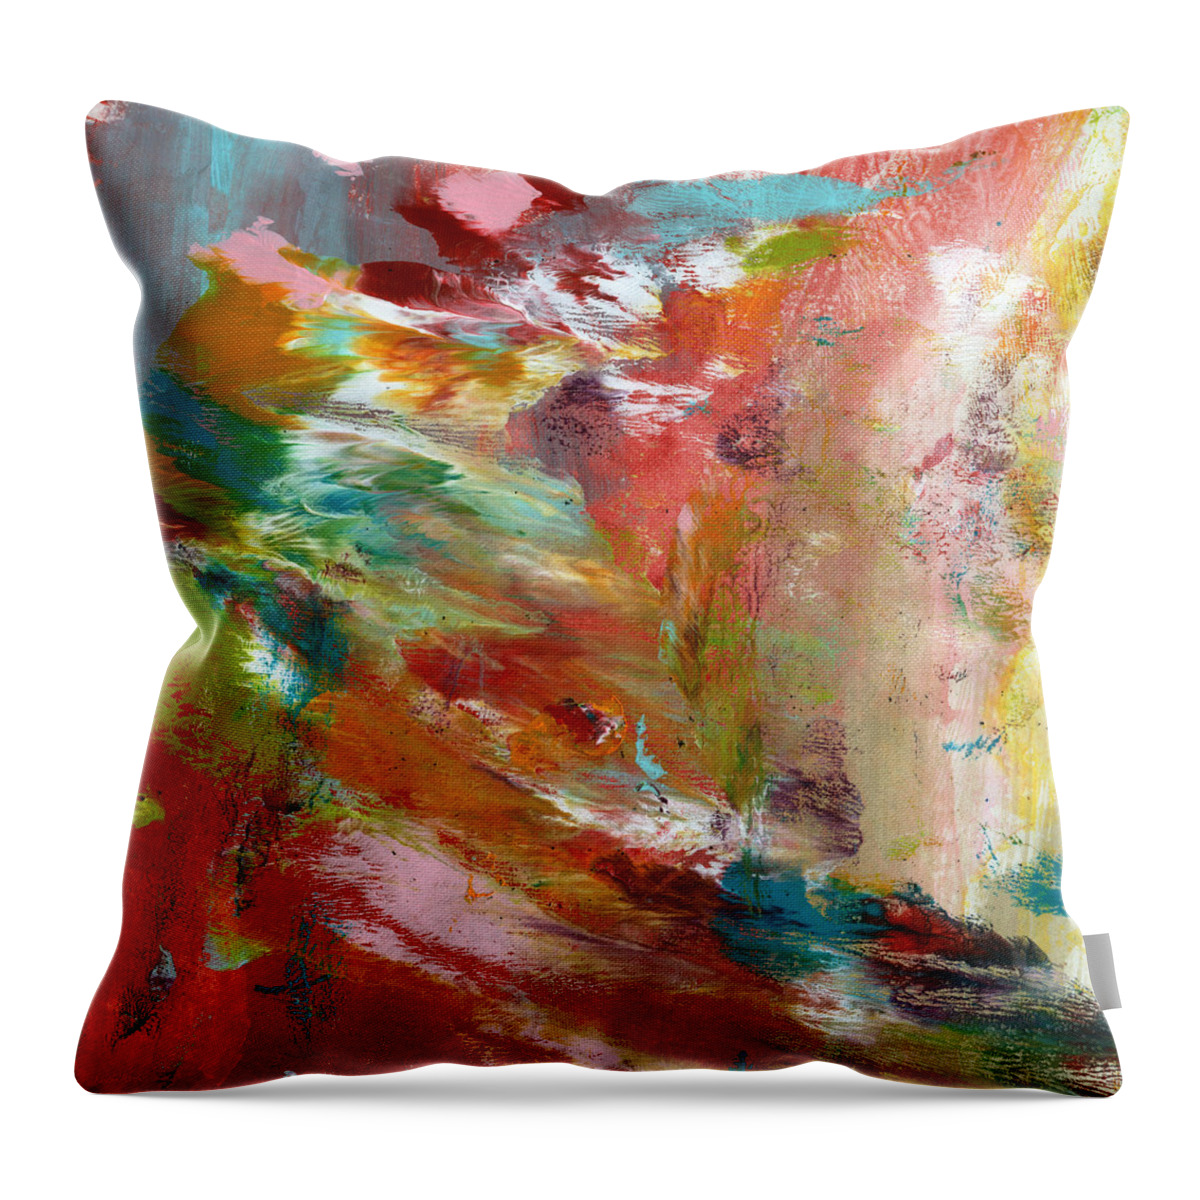 Abstract Throw Pillow featuring the painting In My Dreams- Abstract Art by Linda Woods by Linda Woods